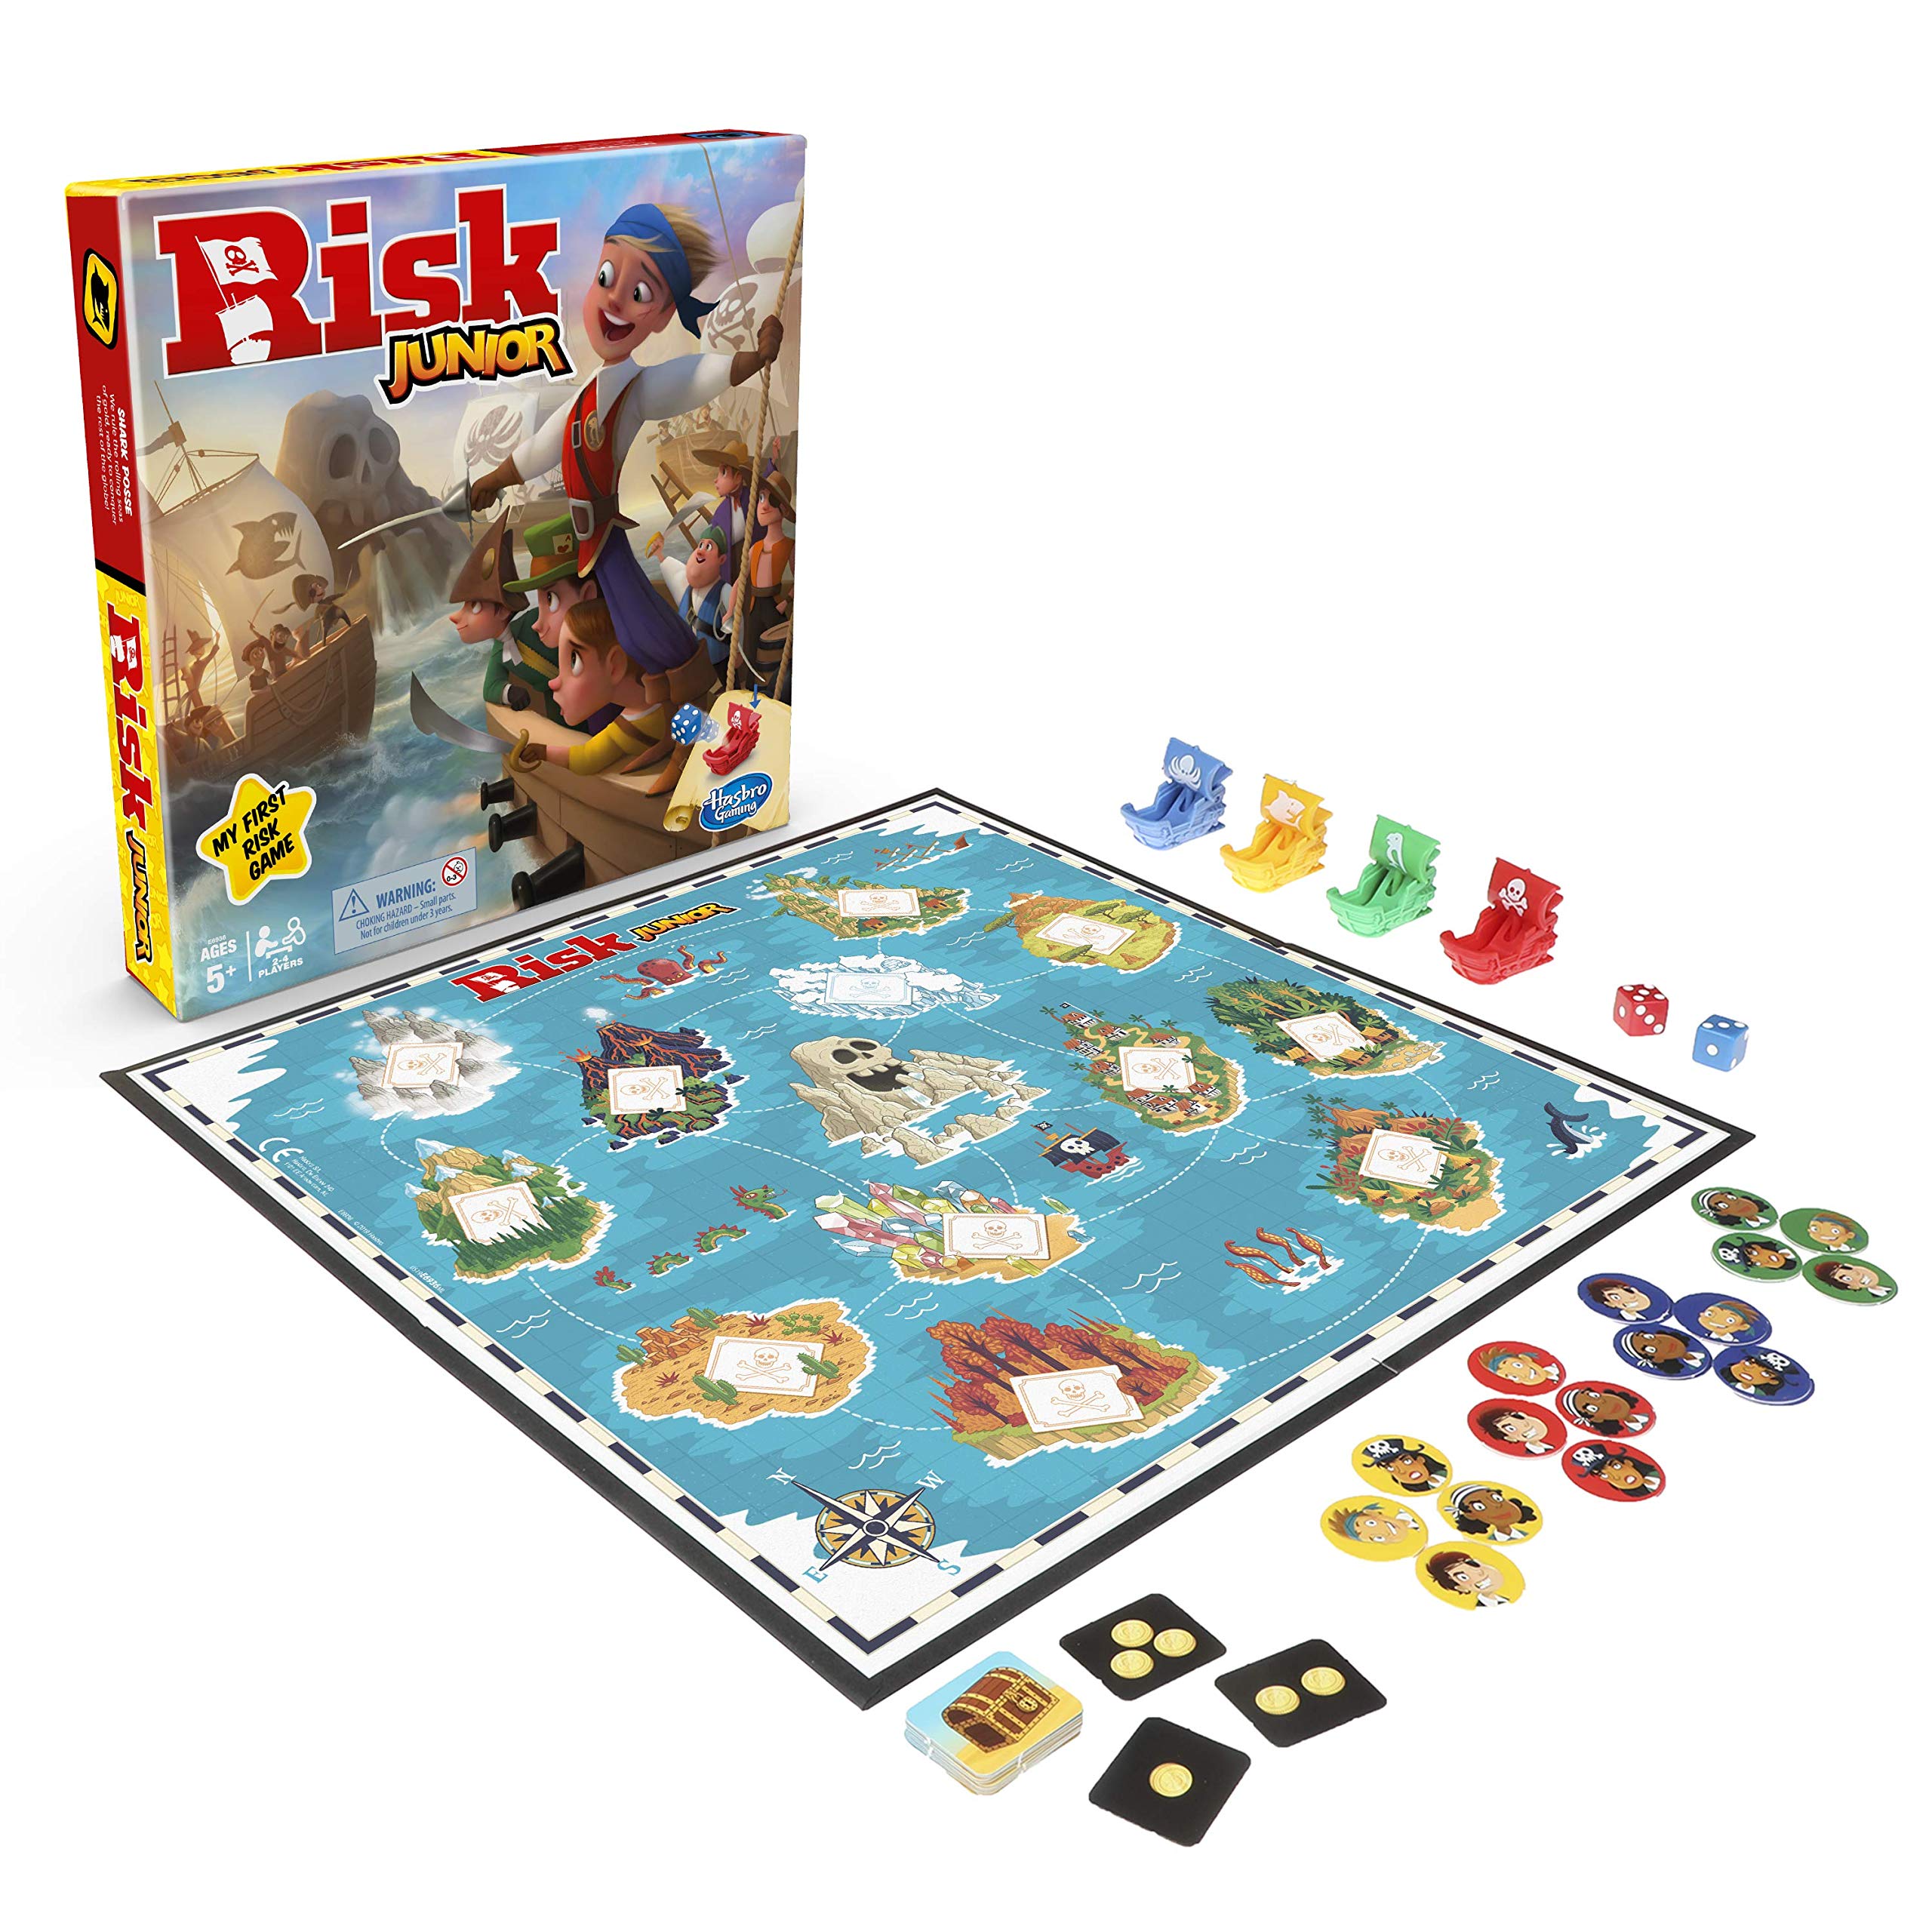 Hasbro Gaming Risk Junior Game, Strategy Board Game, Pirate Themed Game,One Colour,Ages 5 and Up